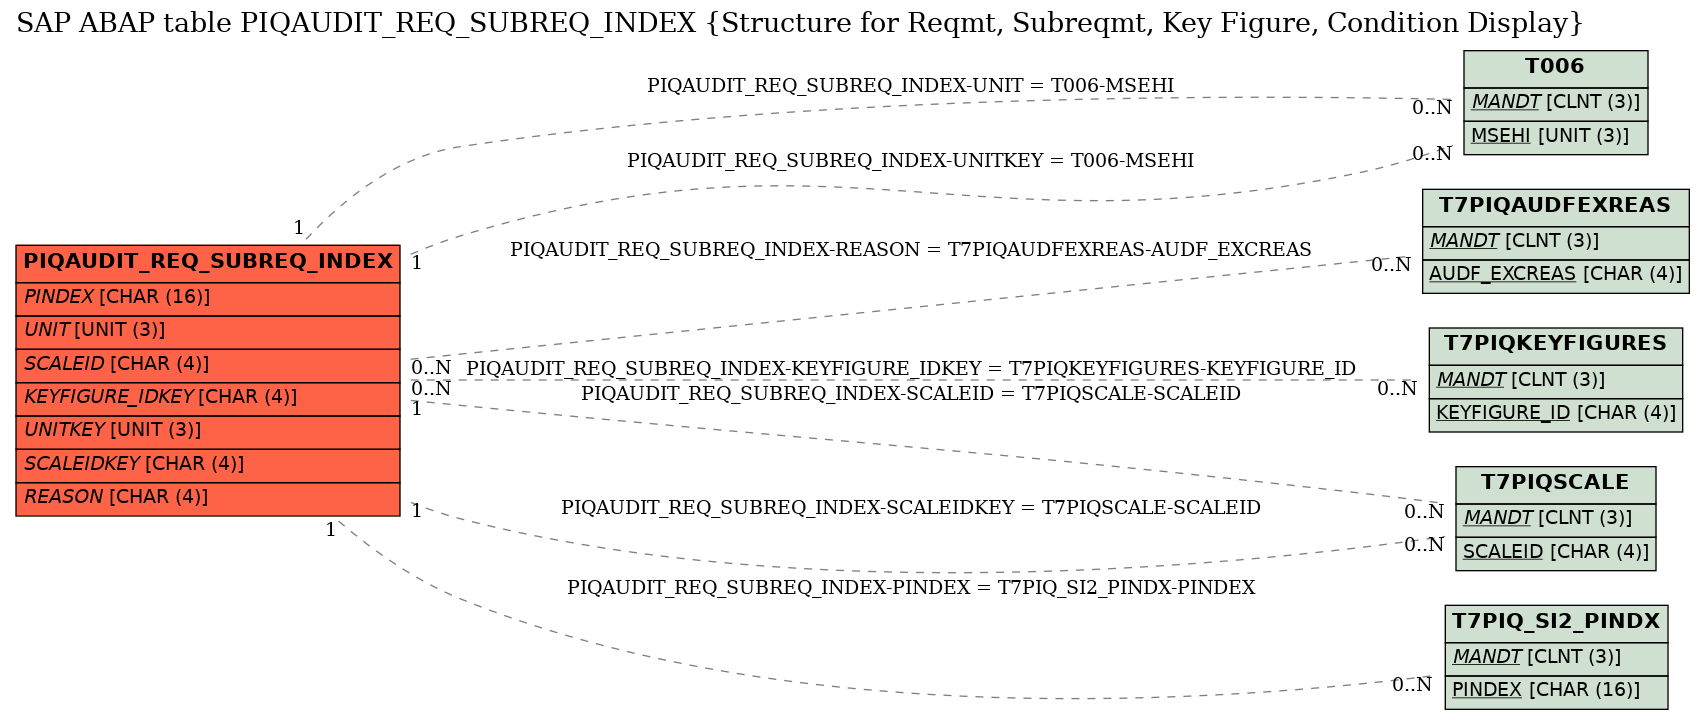 E-R Diagram for table PIQAUDIT_REQ_SUBREQ_INDEX (Structure for Reqmt, Subreqmt, Key Figure, Condition Display)